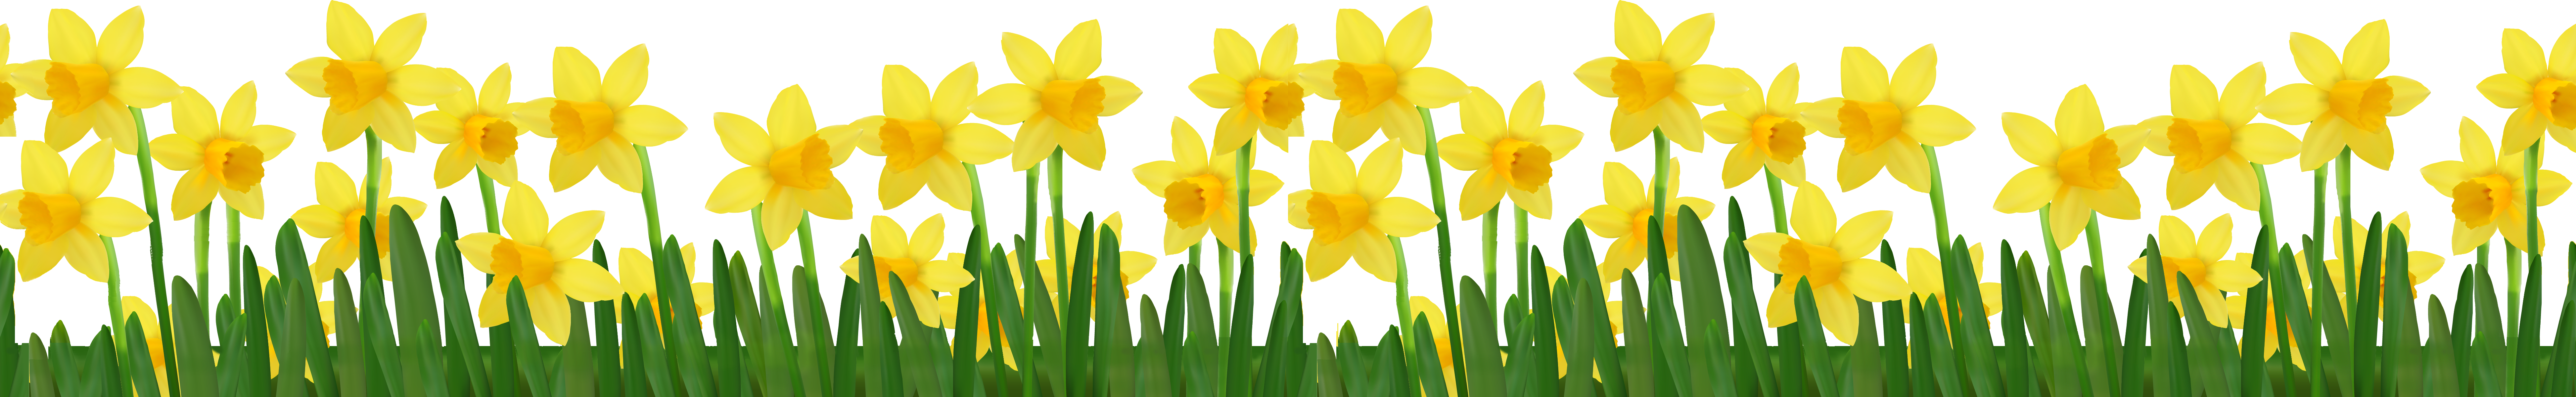 Daffodil clipart grass, Daffodil grass Transparent FREE for download on WebStockReview 2021